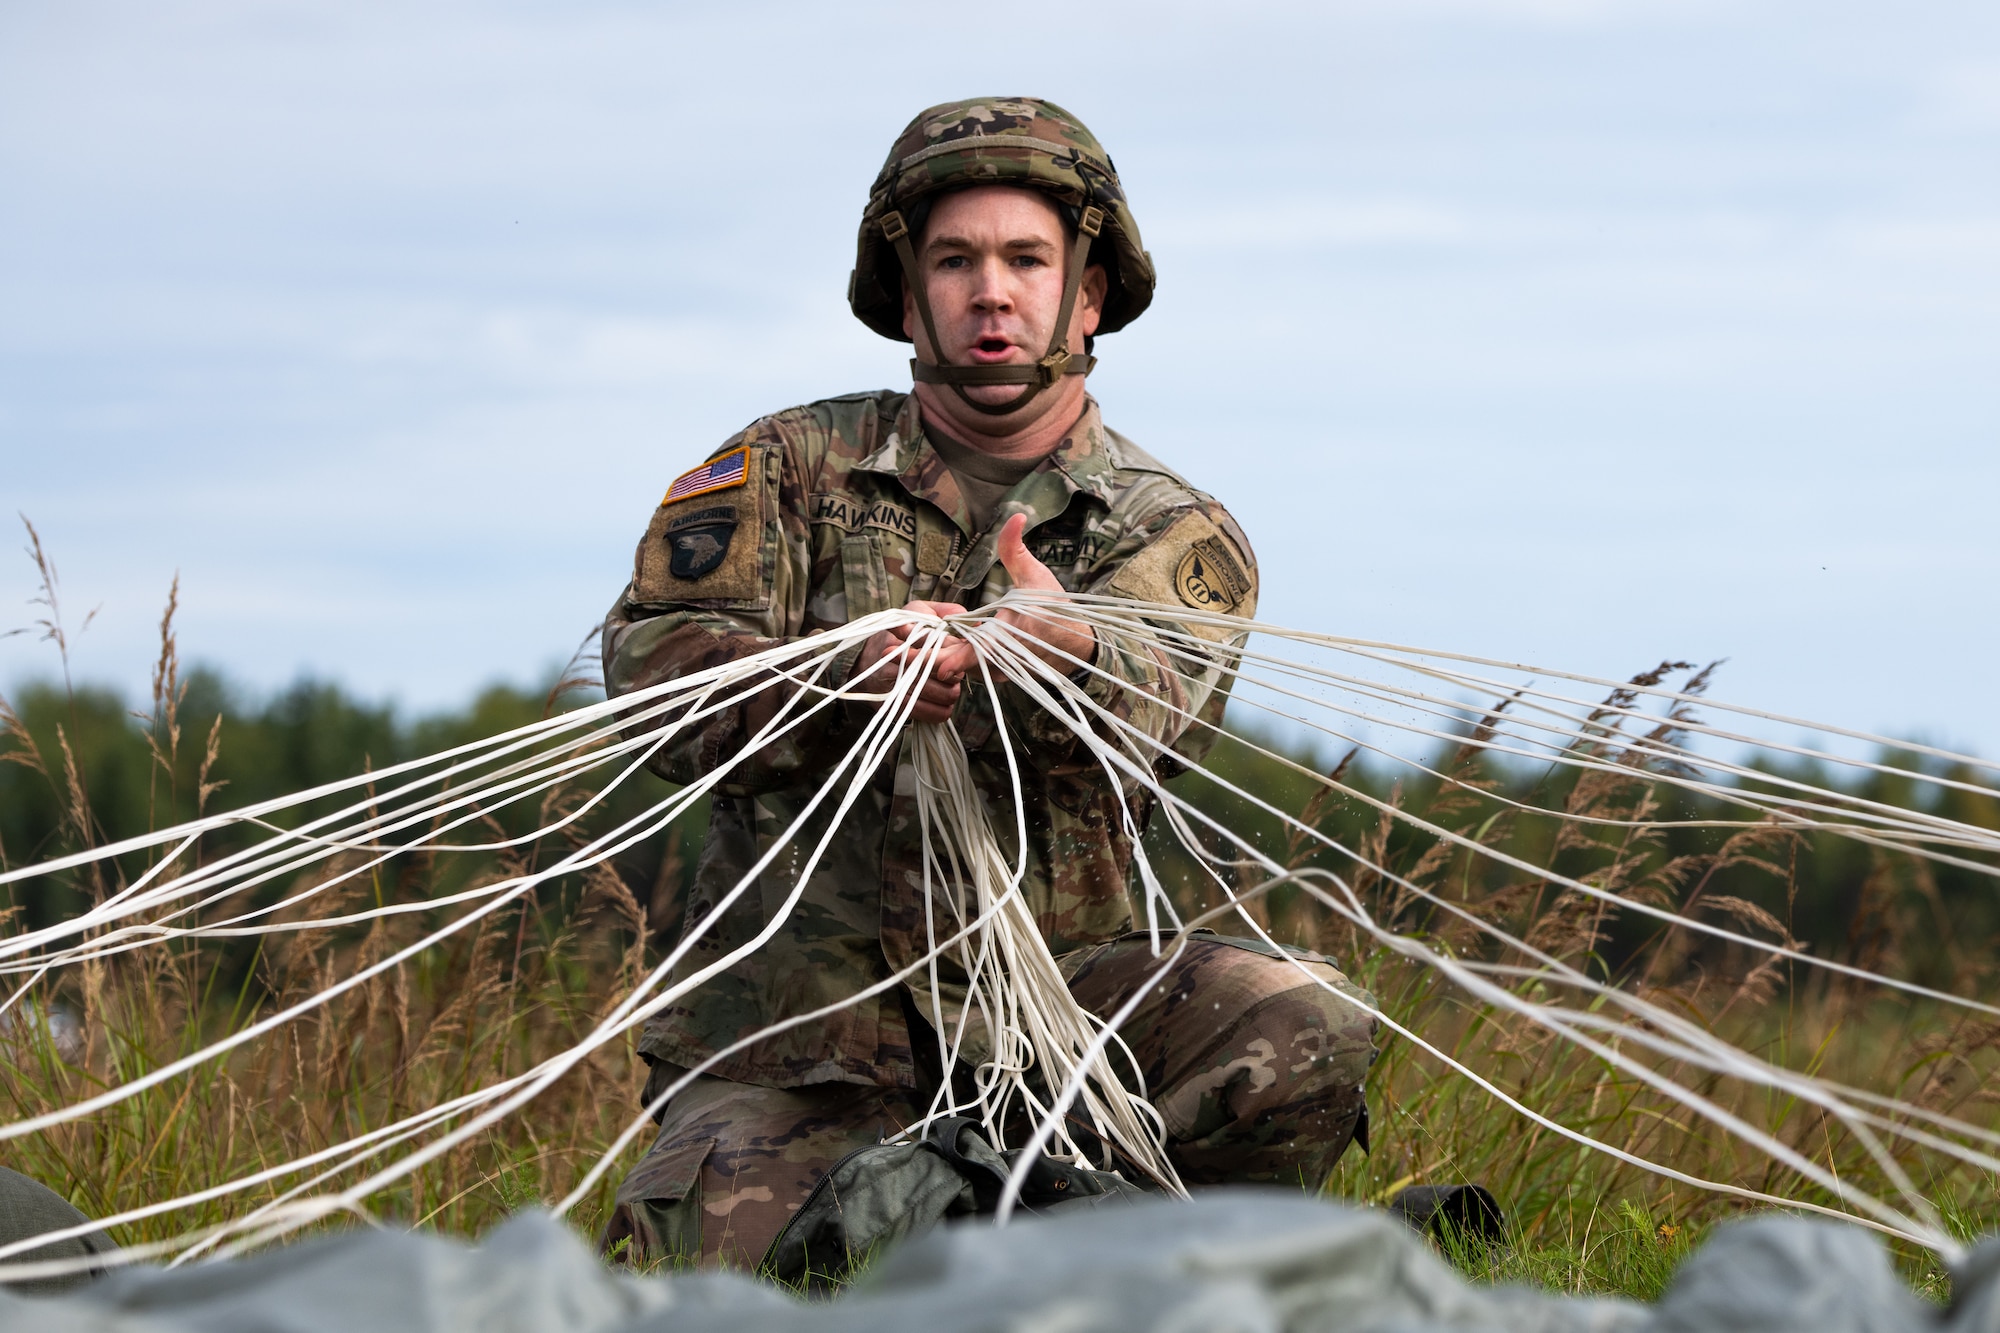 A soldier recovers his parachute after airborne operations.